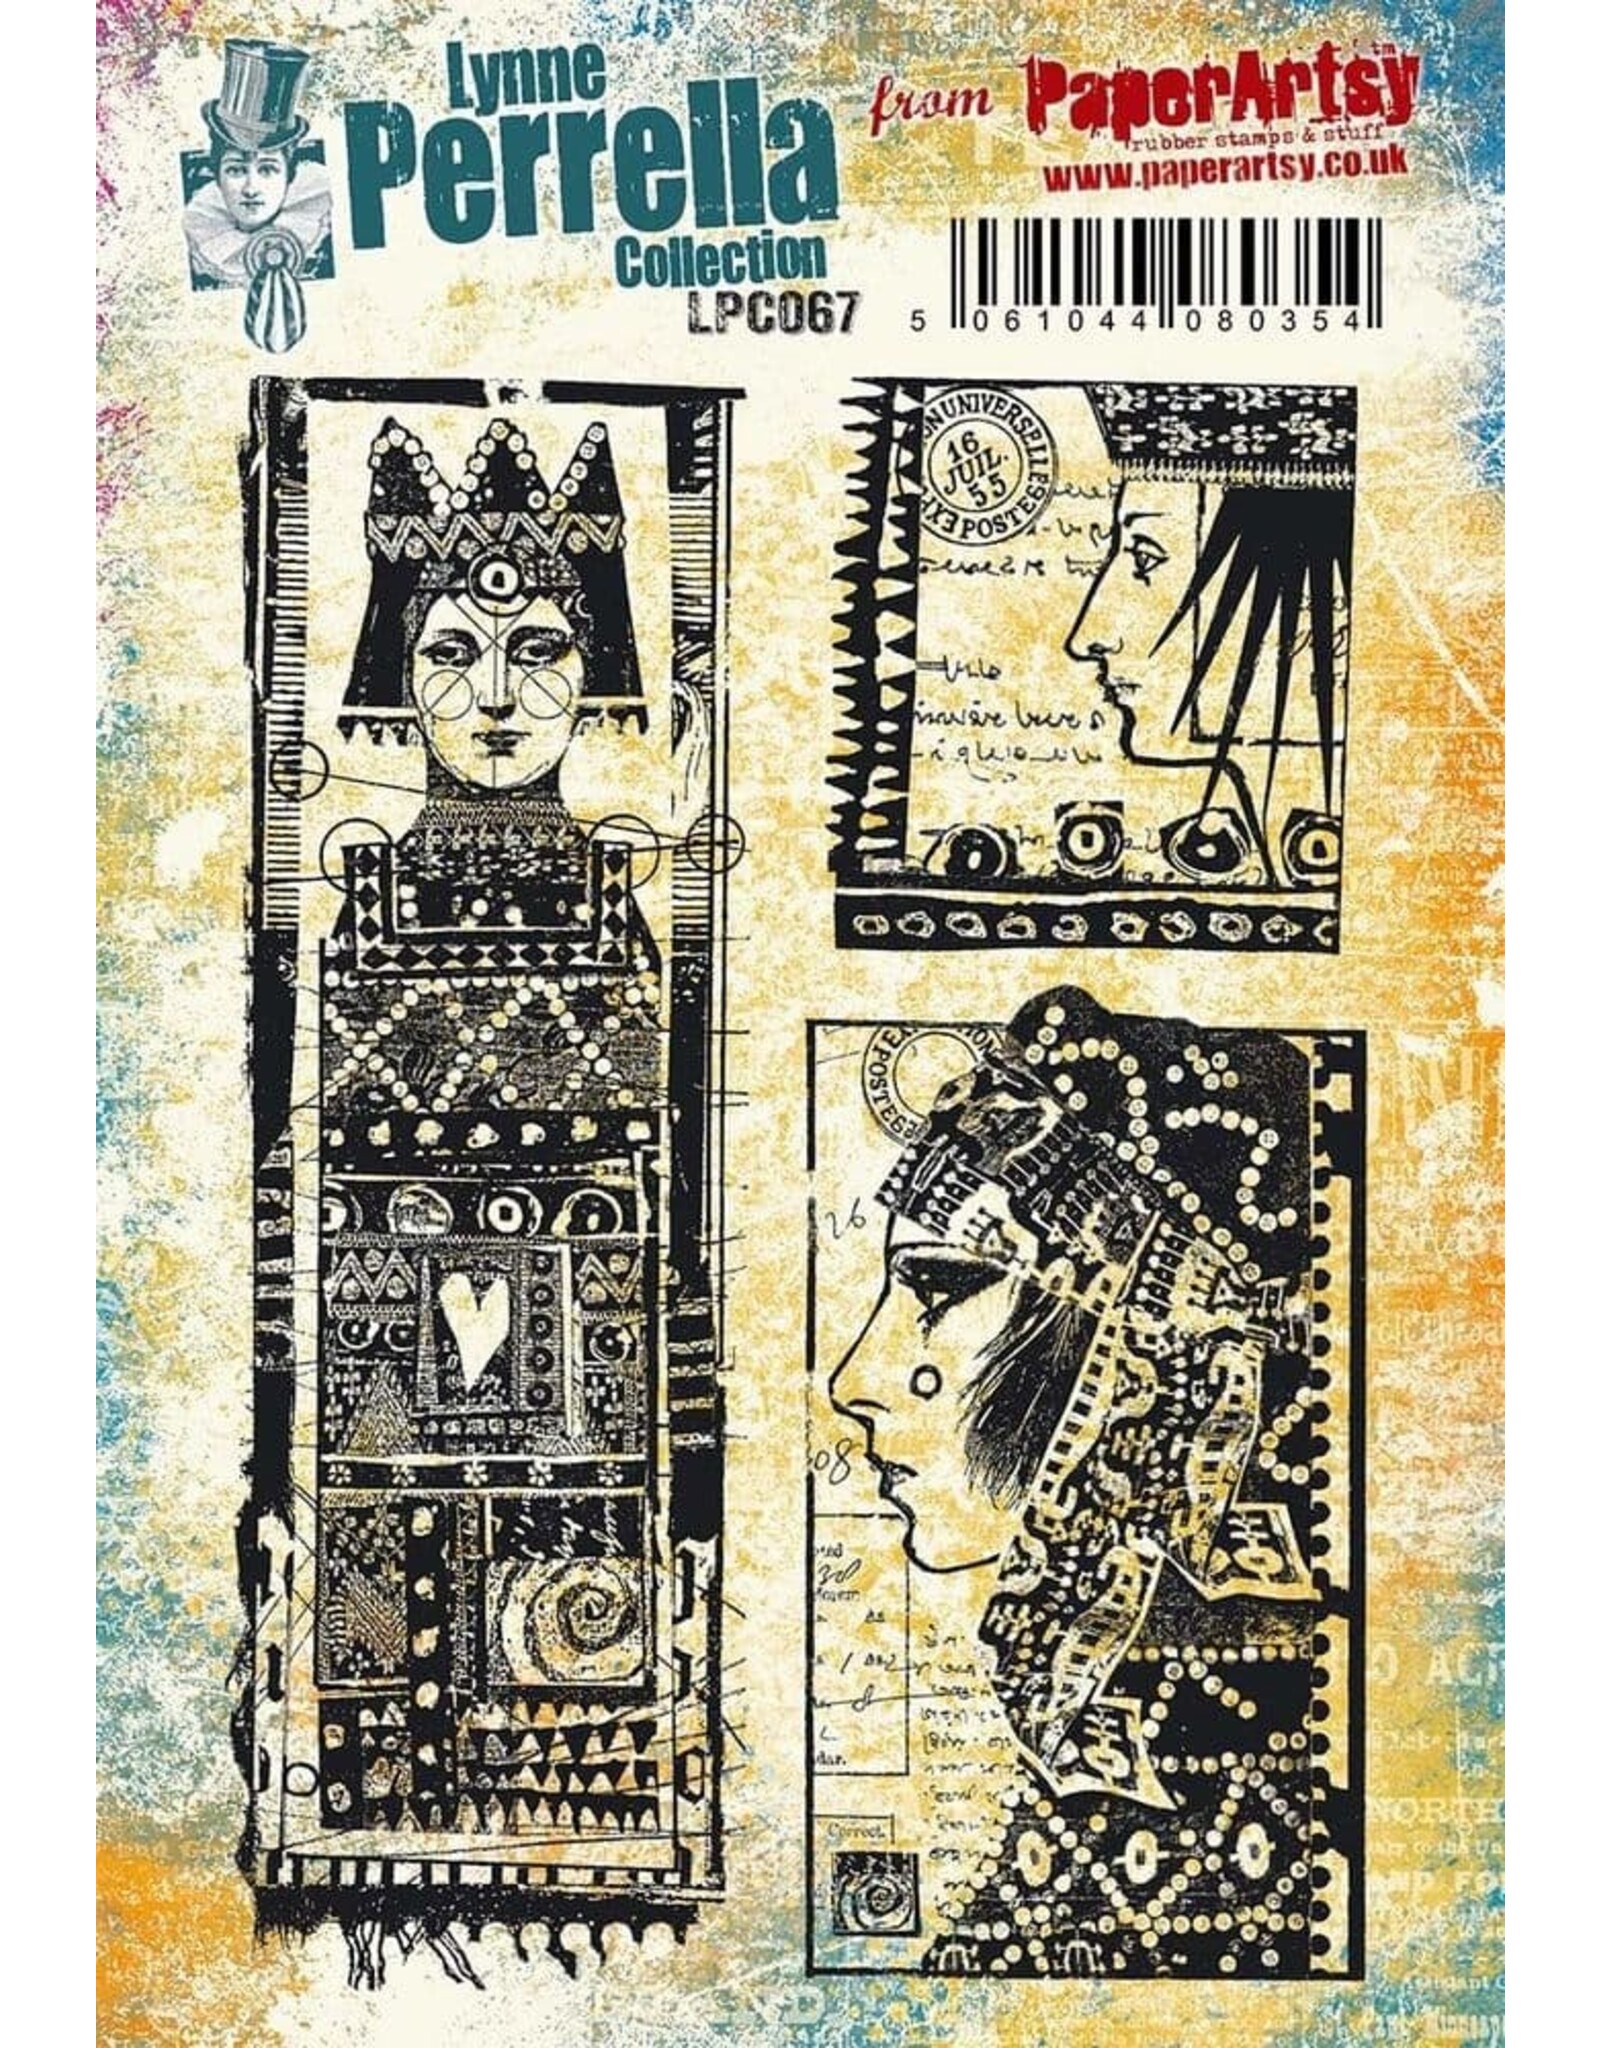 PAPER ARTSY PAPER ARTSY LYNNE PERRELLA COLLECTION LPC067 CLING STAMP SET